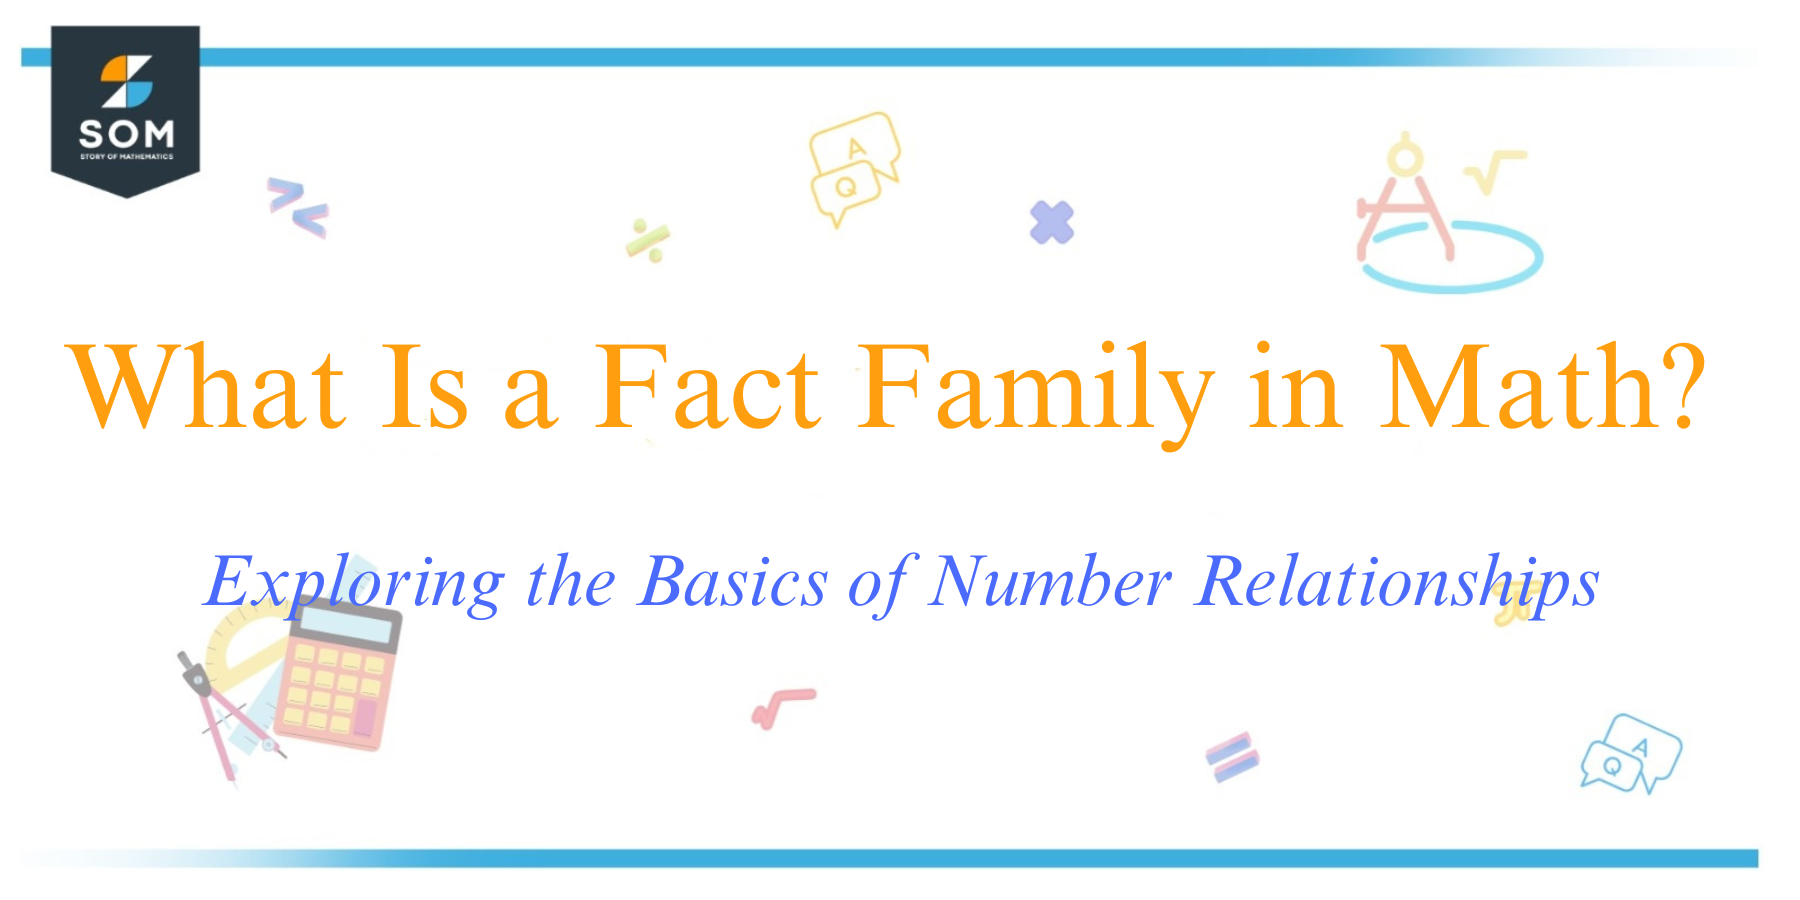 What Is a Fact Family in Math Exploring the Basics of Number Relationships